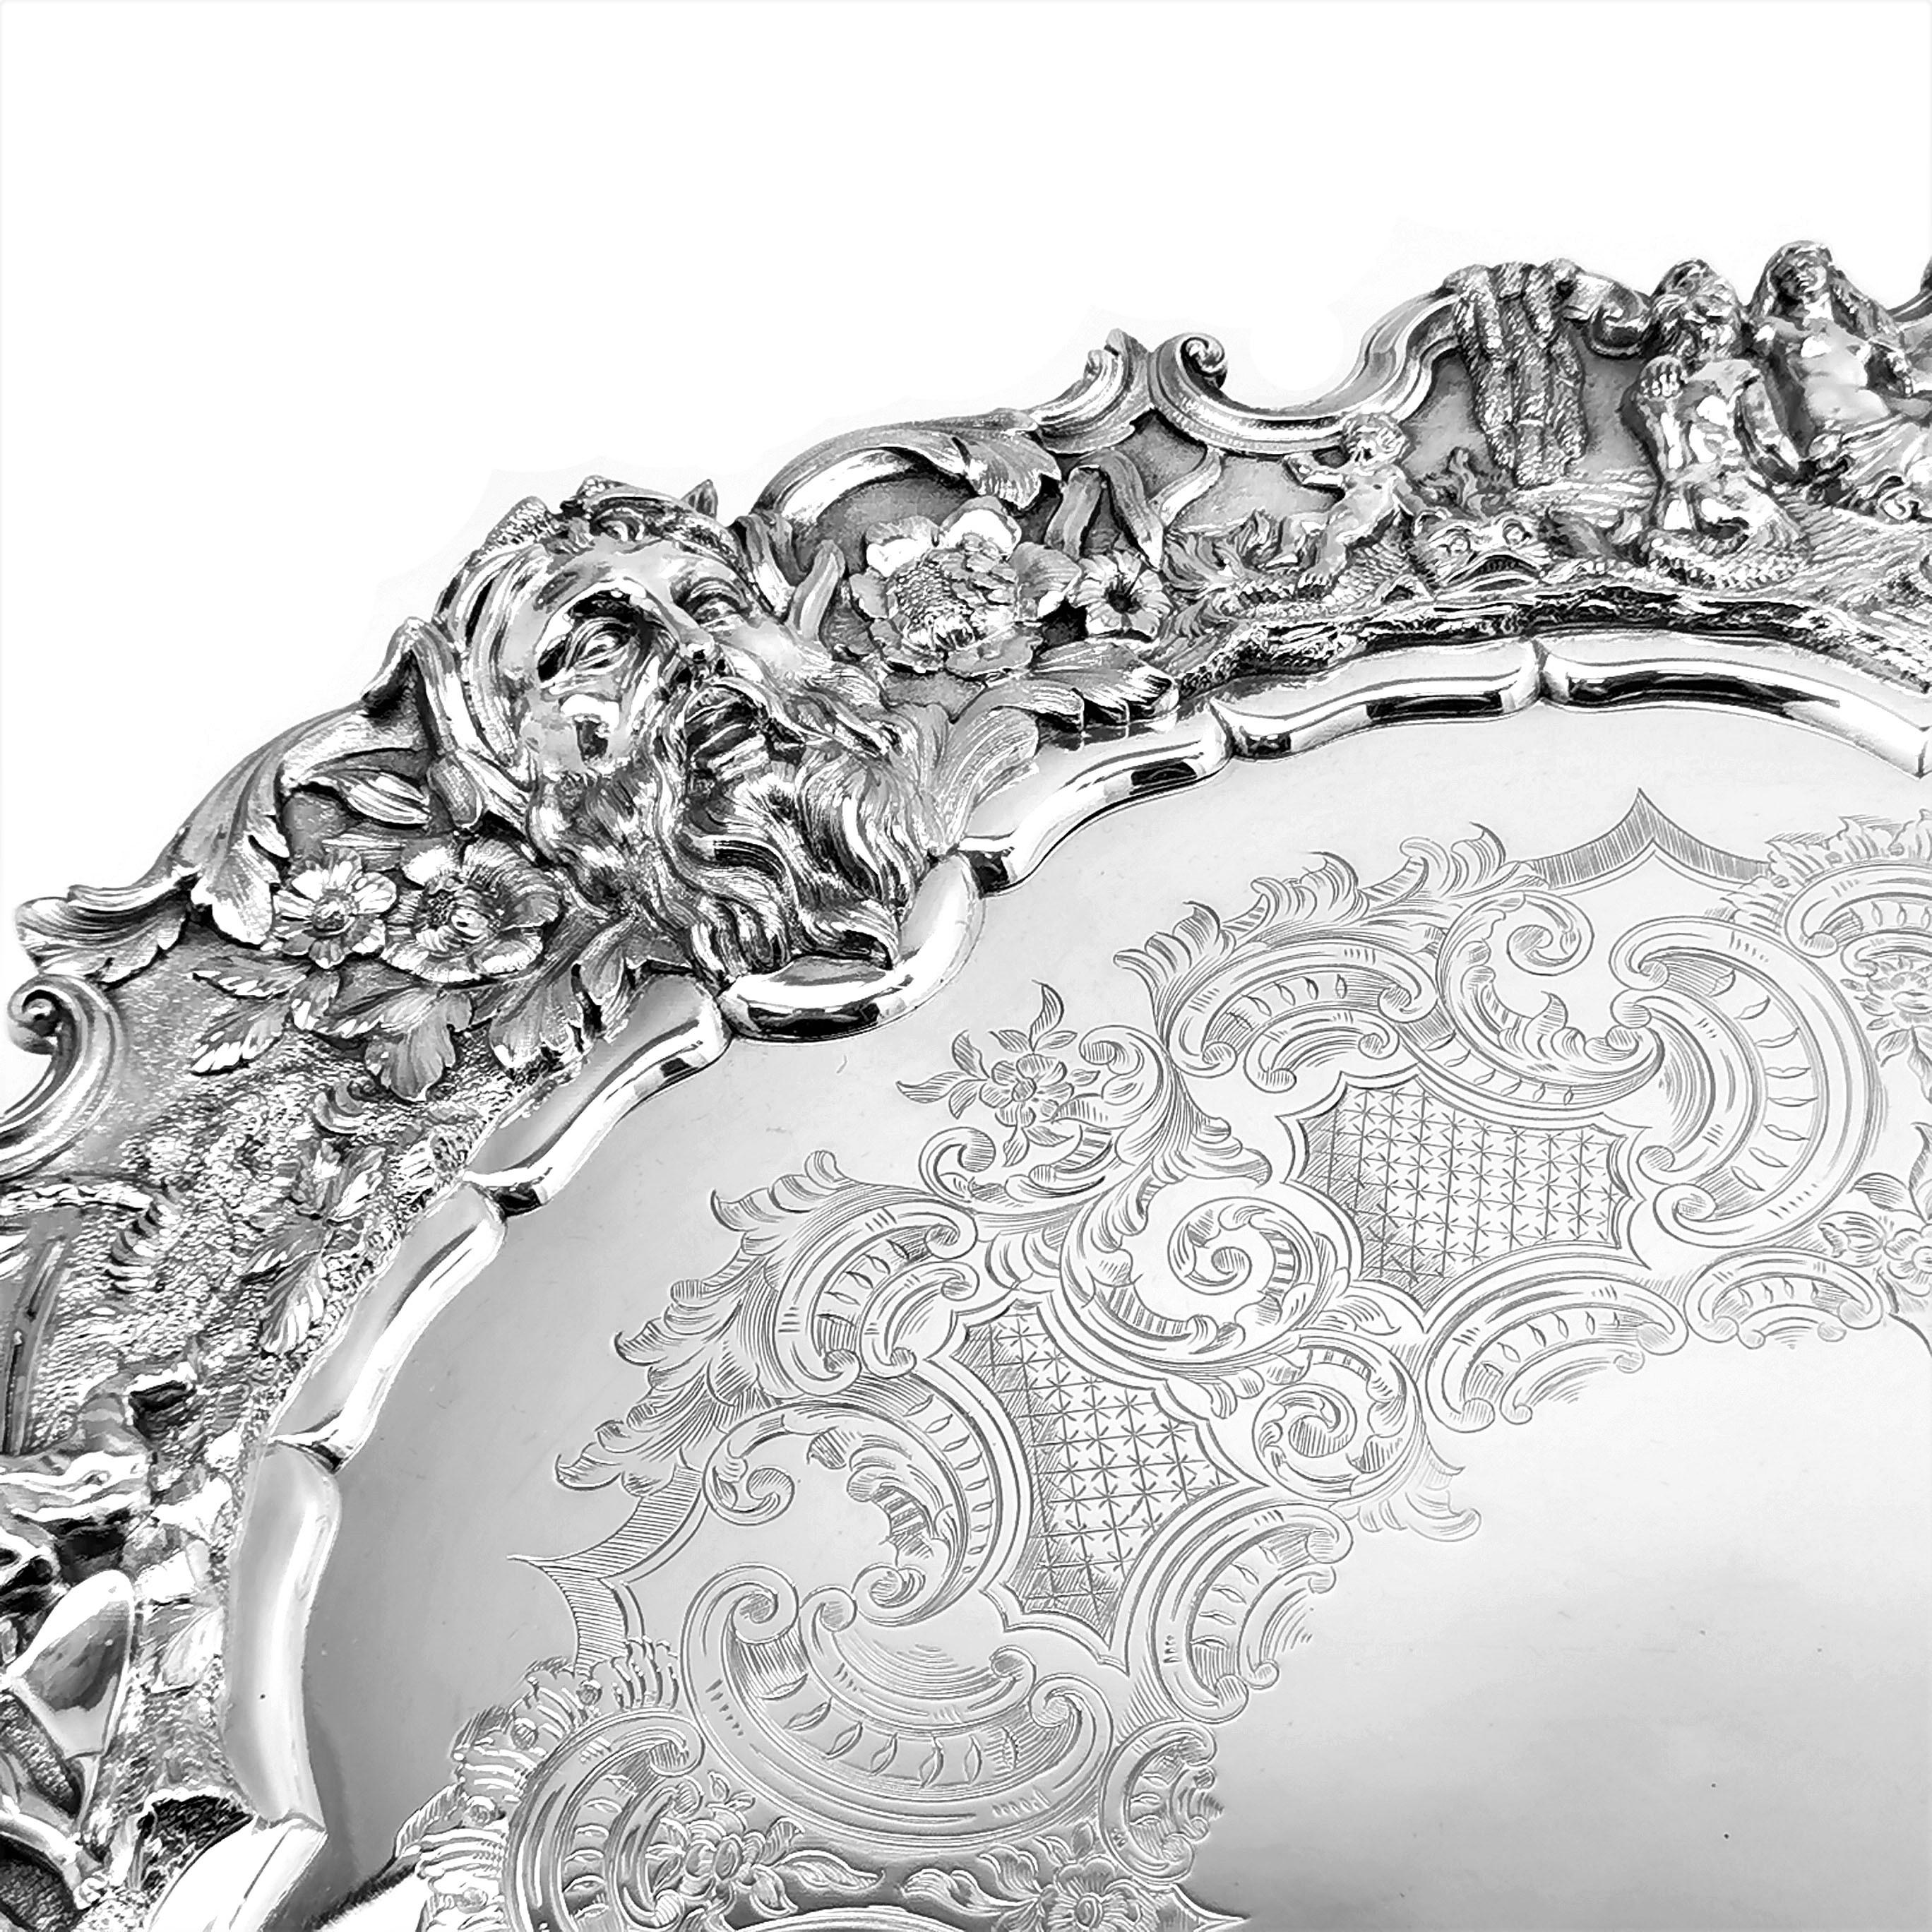 Victorian Extra Large Ornate Silver Plated Salver Tray Platter circa 1880 4